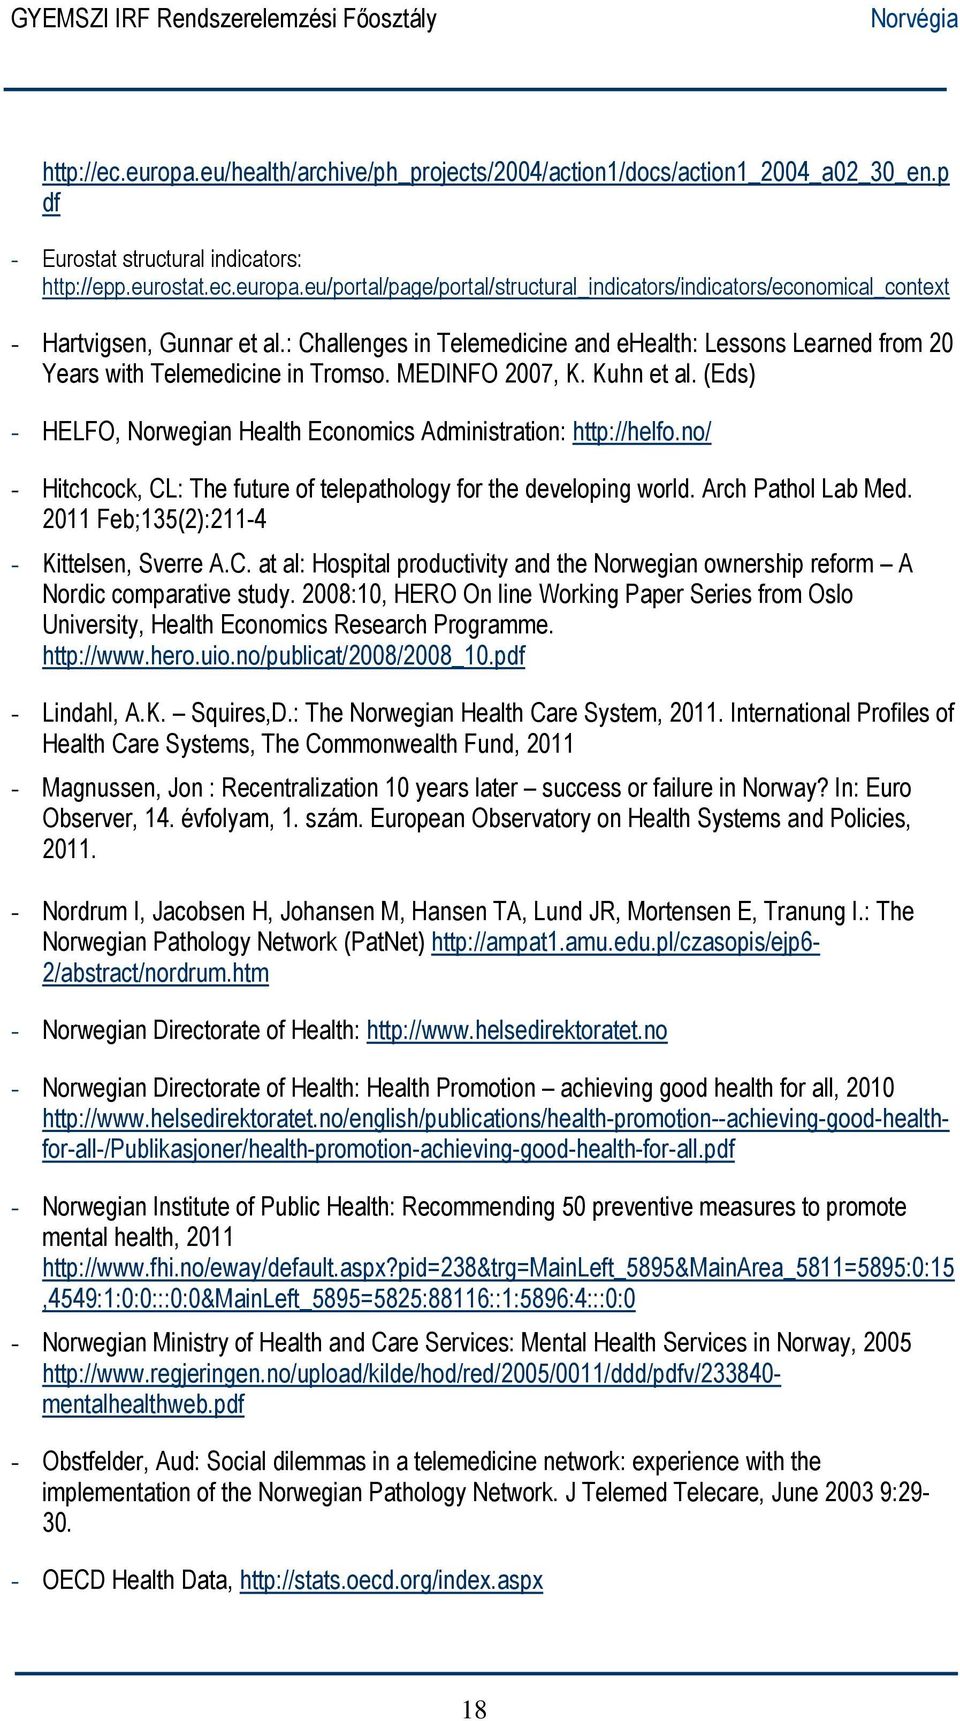 (Eds) - HELFO, Norwegian Health Economics Administration: http://helfo.no/ - Hitchcock, CL: The future of telepathology for the developing world. Arch Pathol Lab Med.